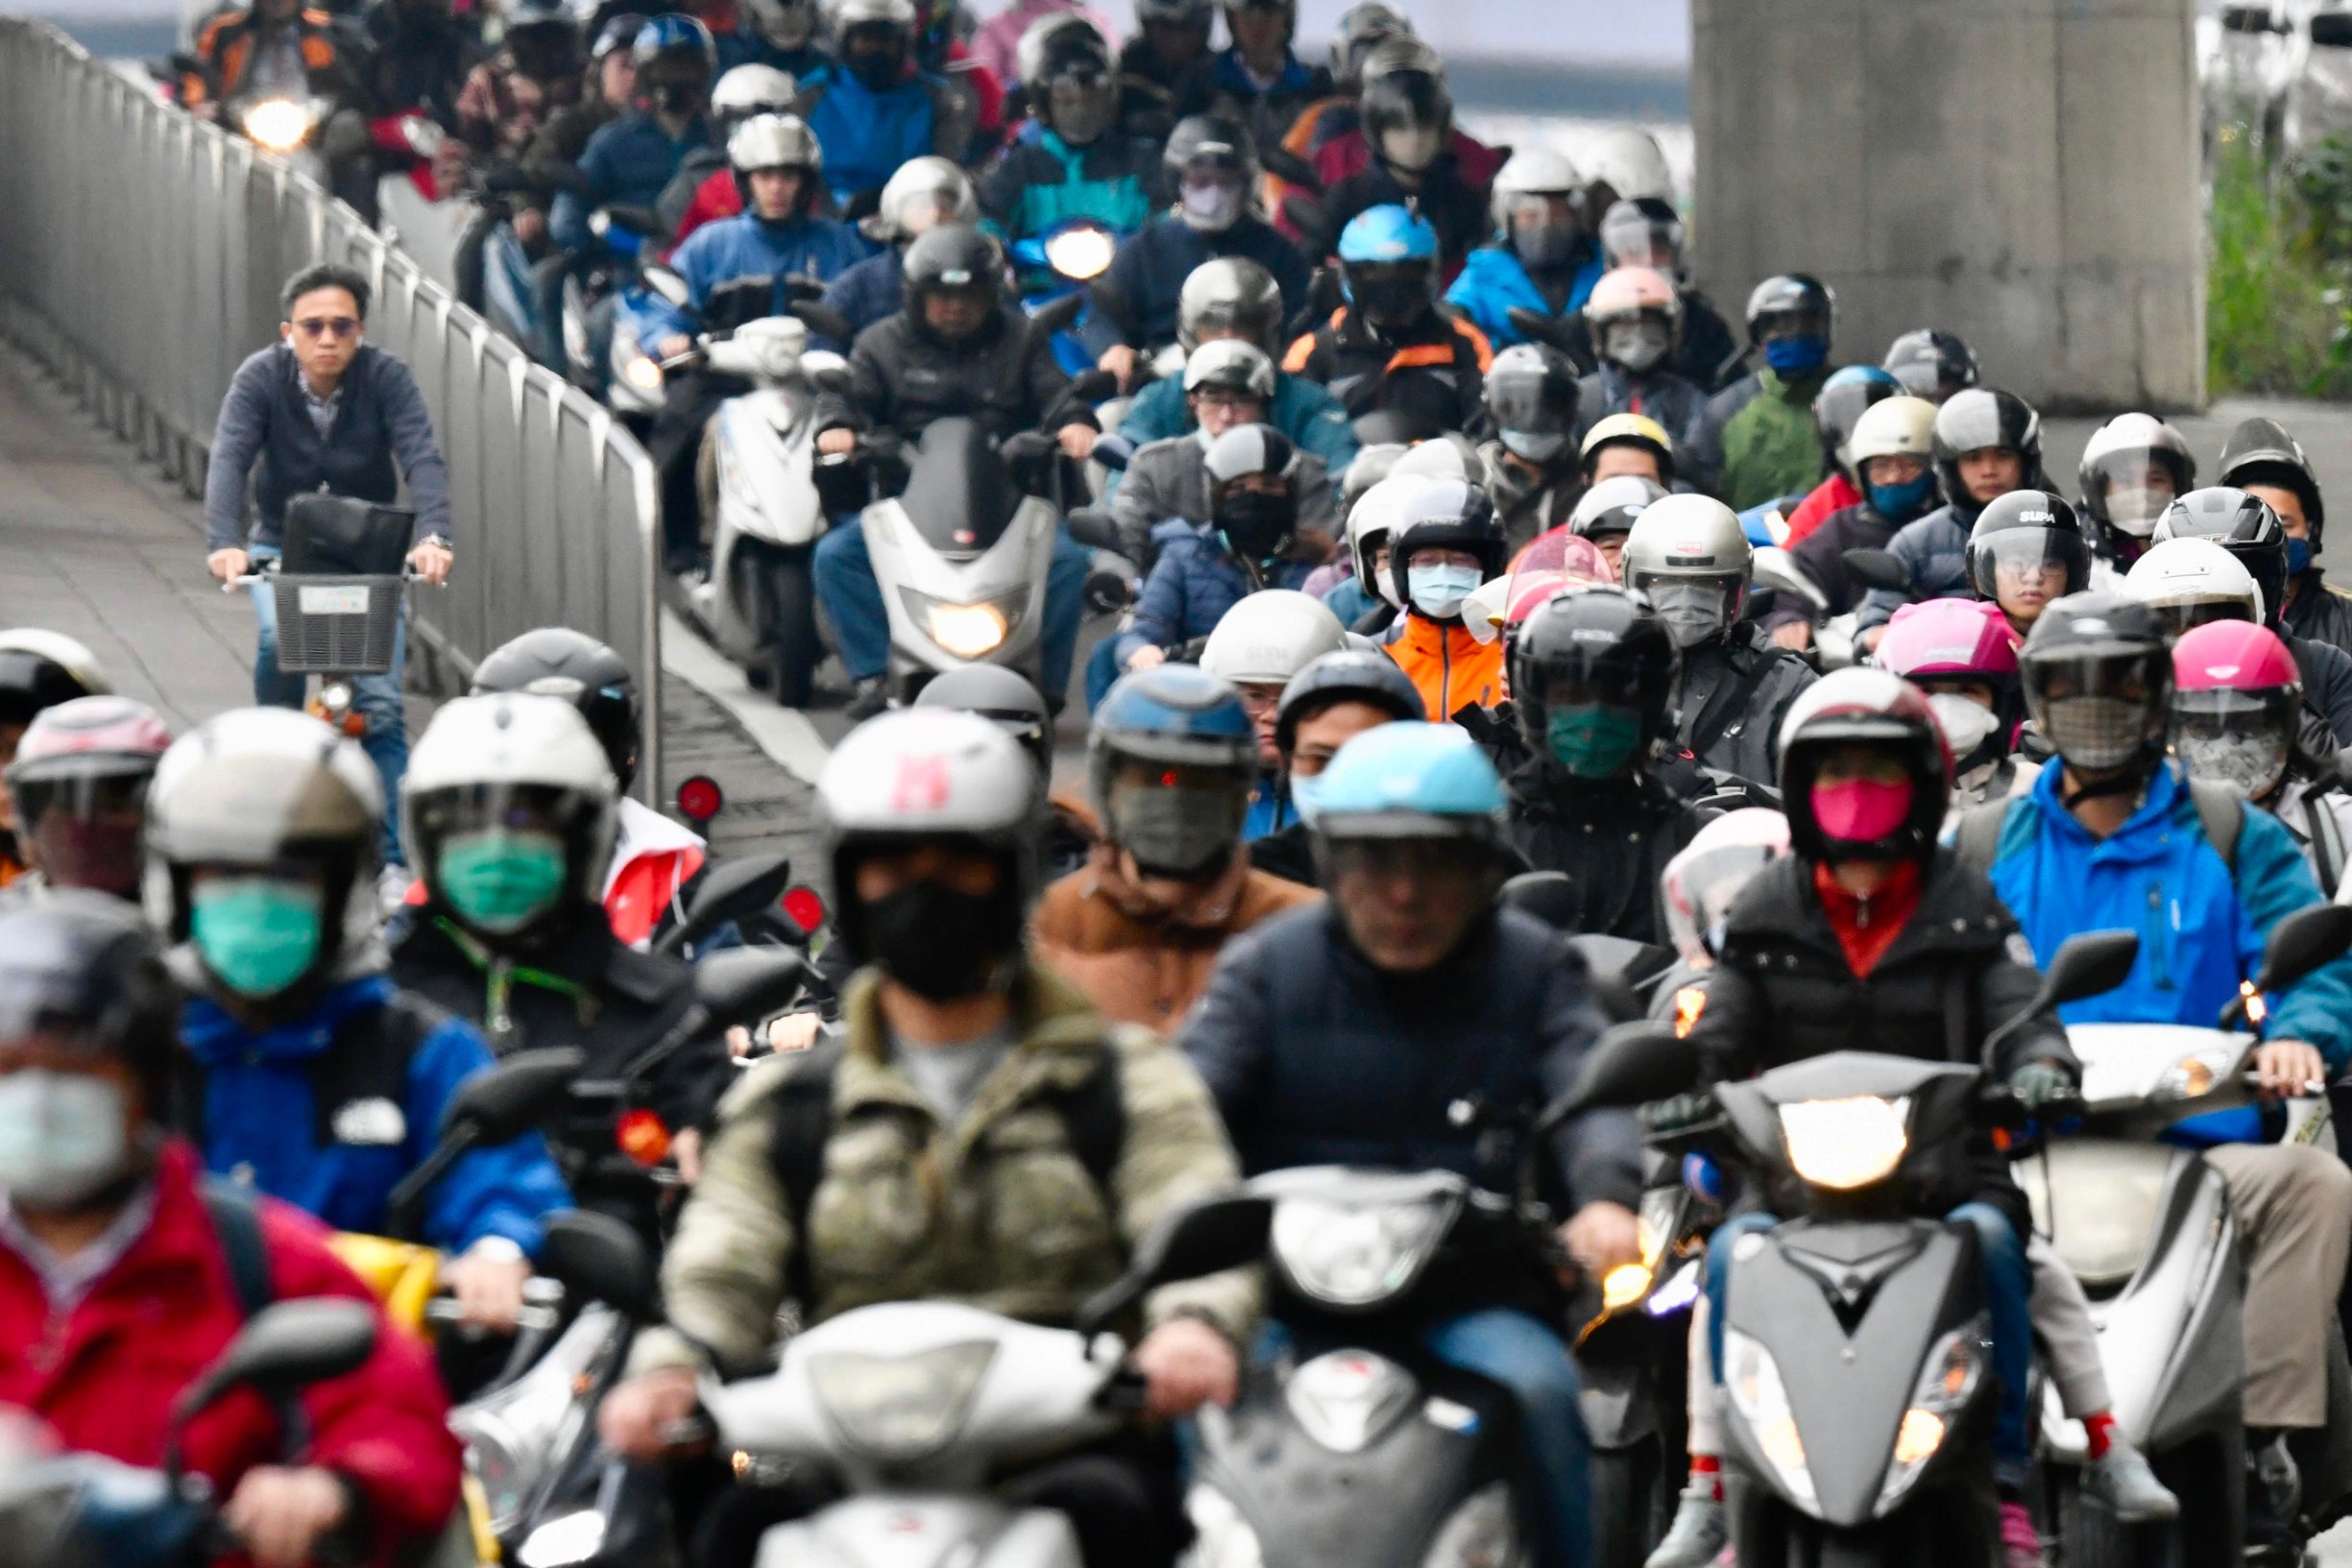 Motorcyclists wearing face masks to prevent the COVID-19 coronavirus, ride during the peak hours while heading to work in Taipei on March 18, 2020. (Photo by Sam Yeh / AFP)